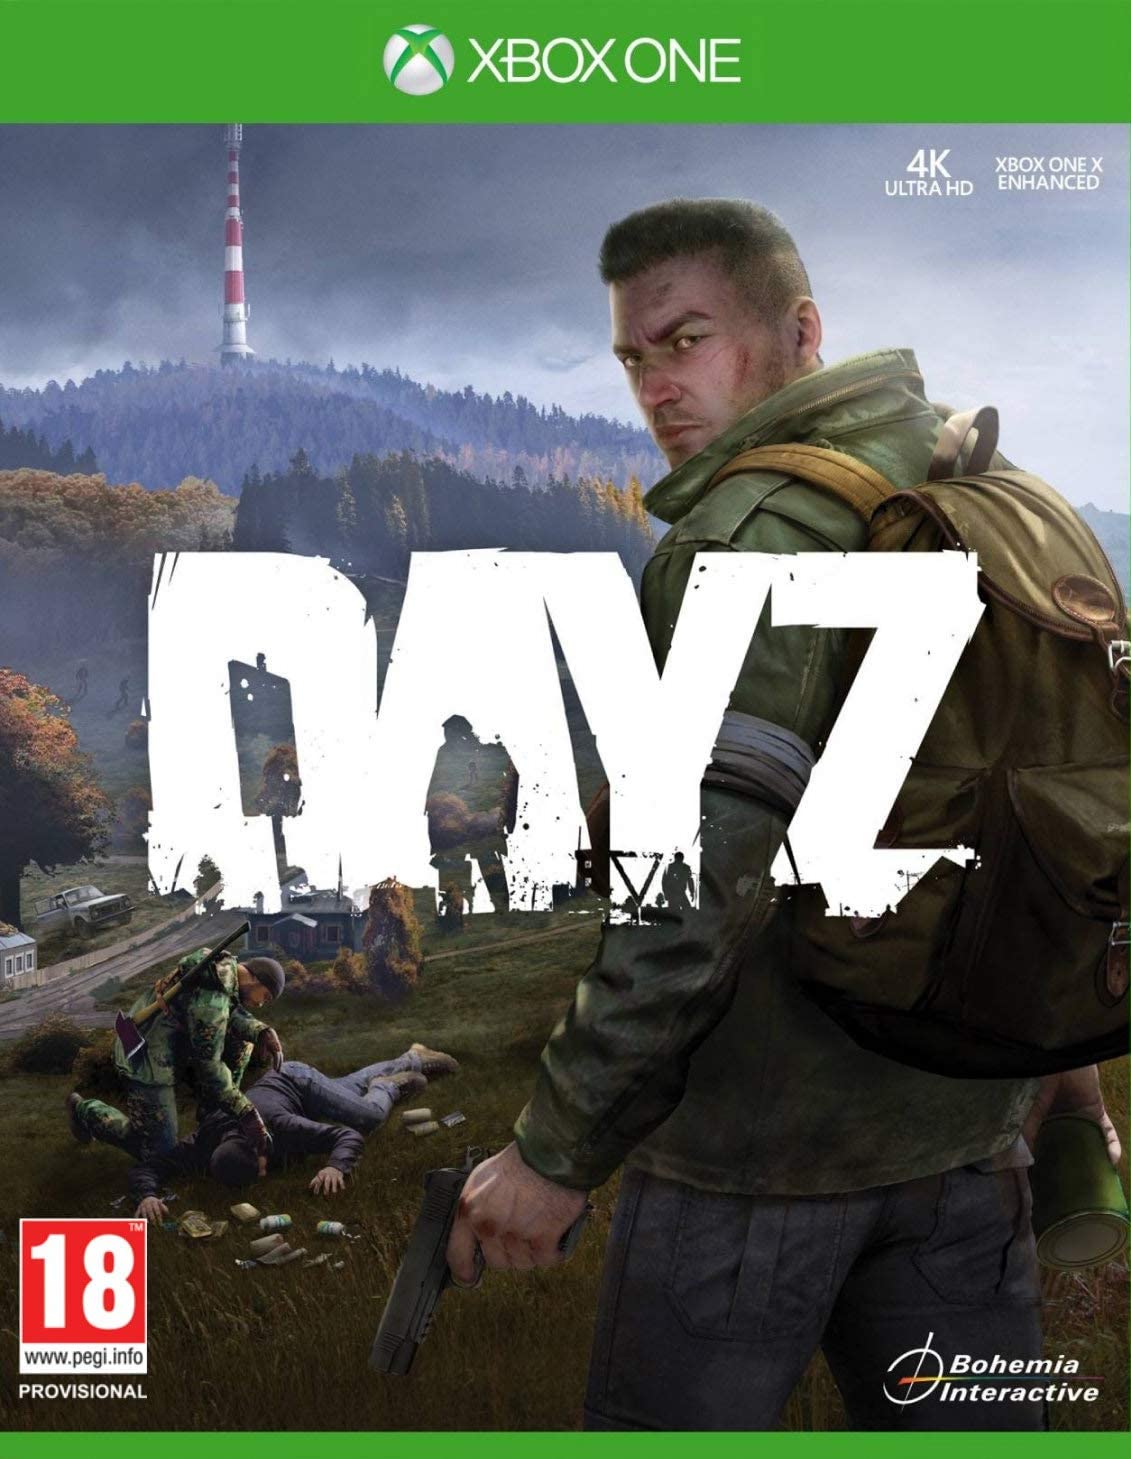 Dayz Livonia Edition Download Key for Xbox One / Series X (Digital Download)